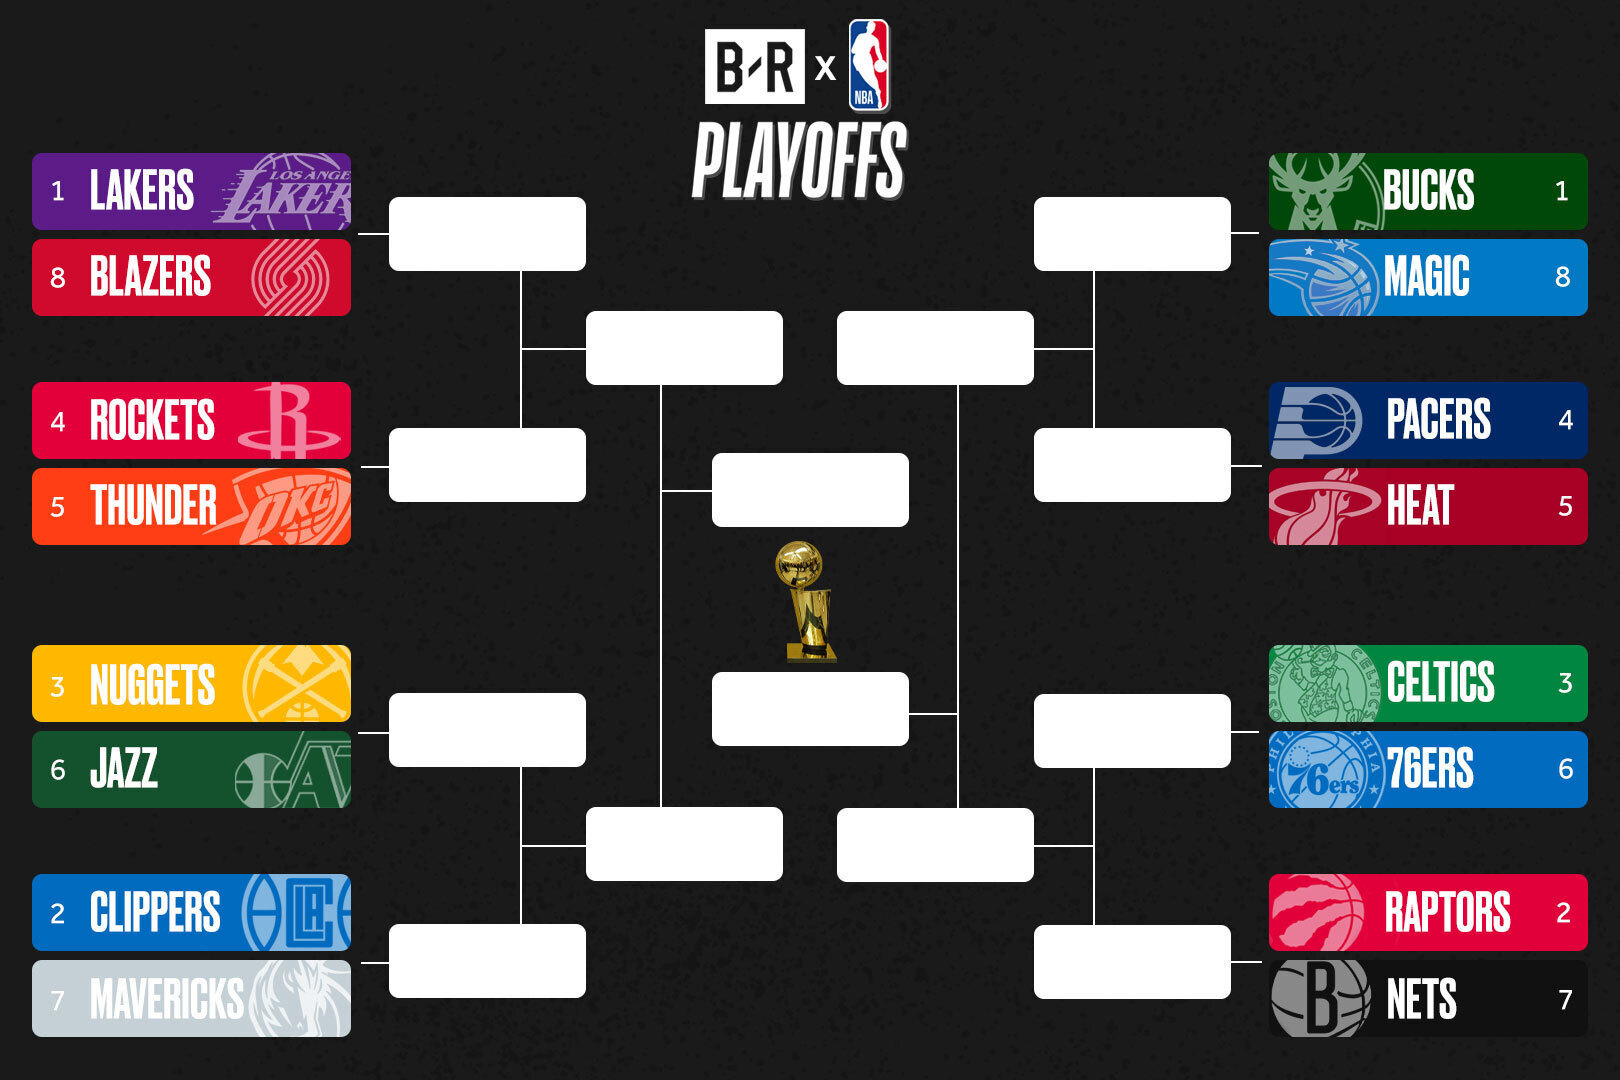 NBA playoffs 2020: TV schedule, storylines and matchups to watch